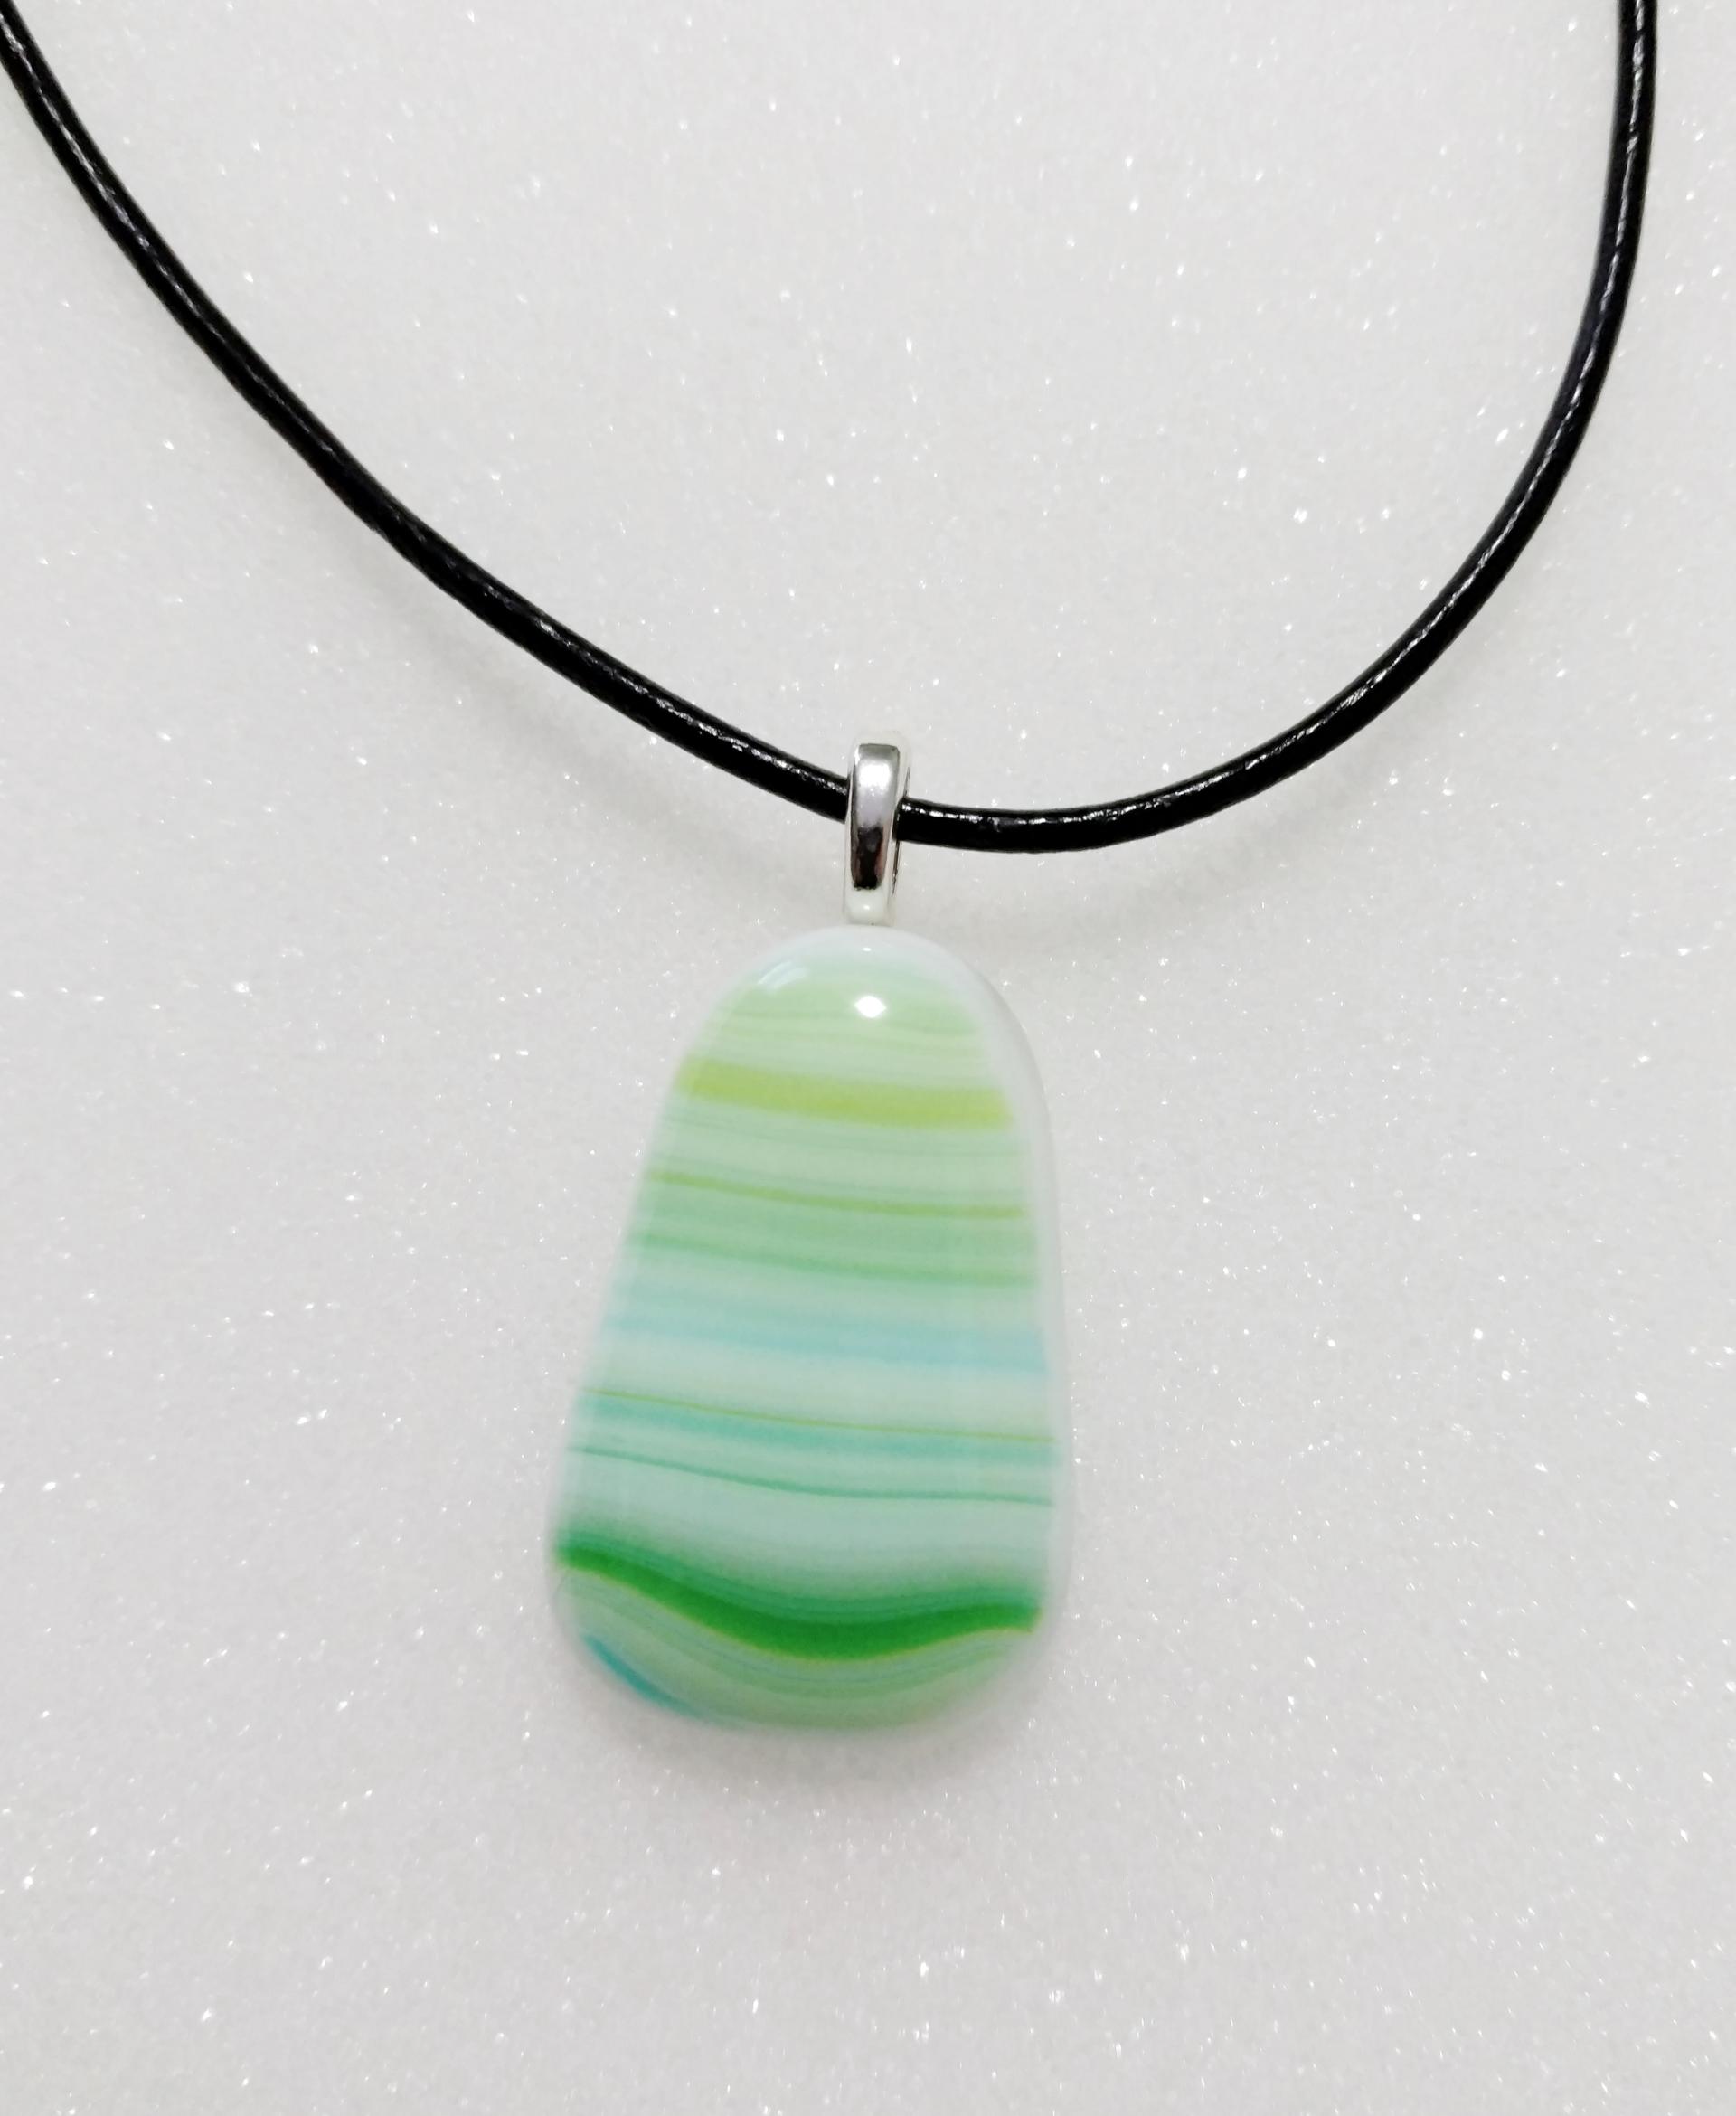 Fused Glass Pendant, Green and White Swirl